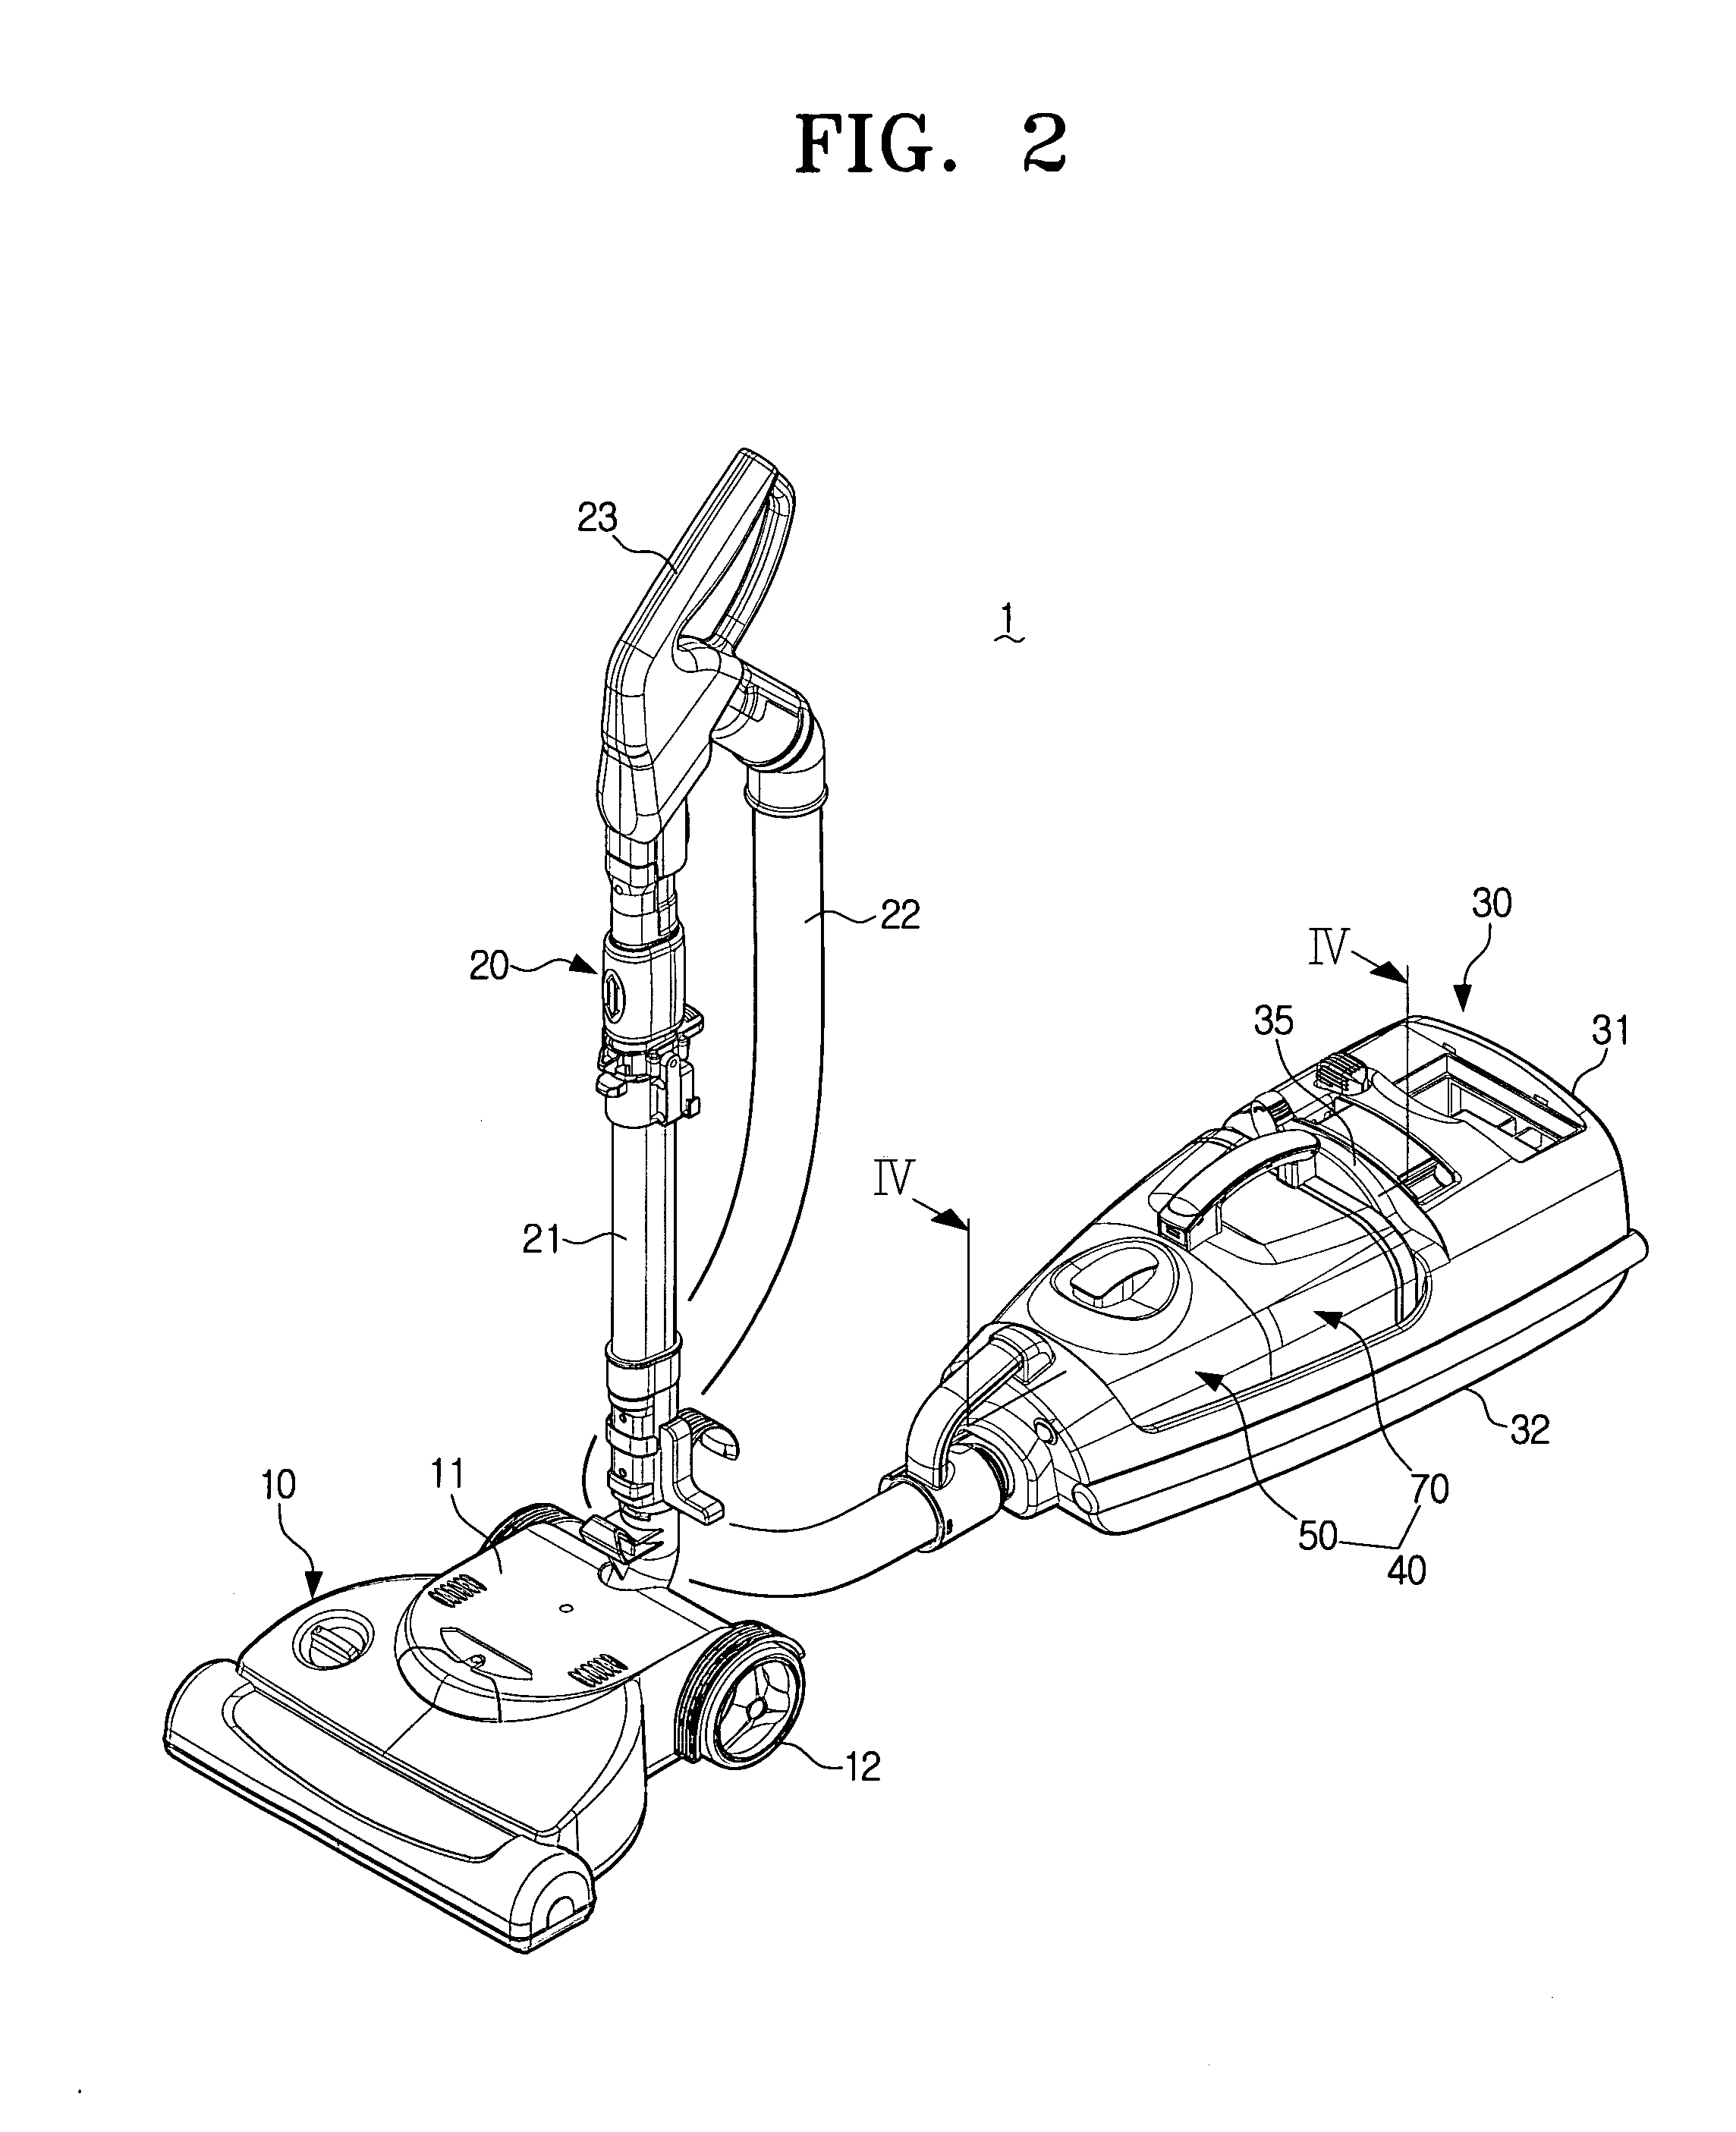 Cyclone contaminant collecting apparatus for vacuum cleaner